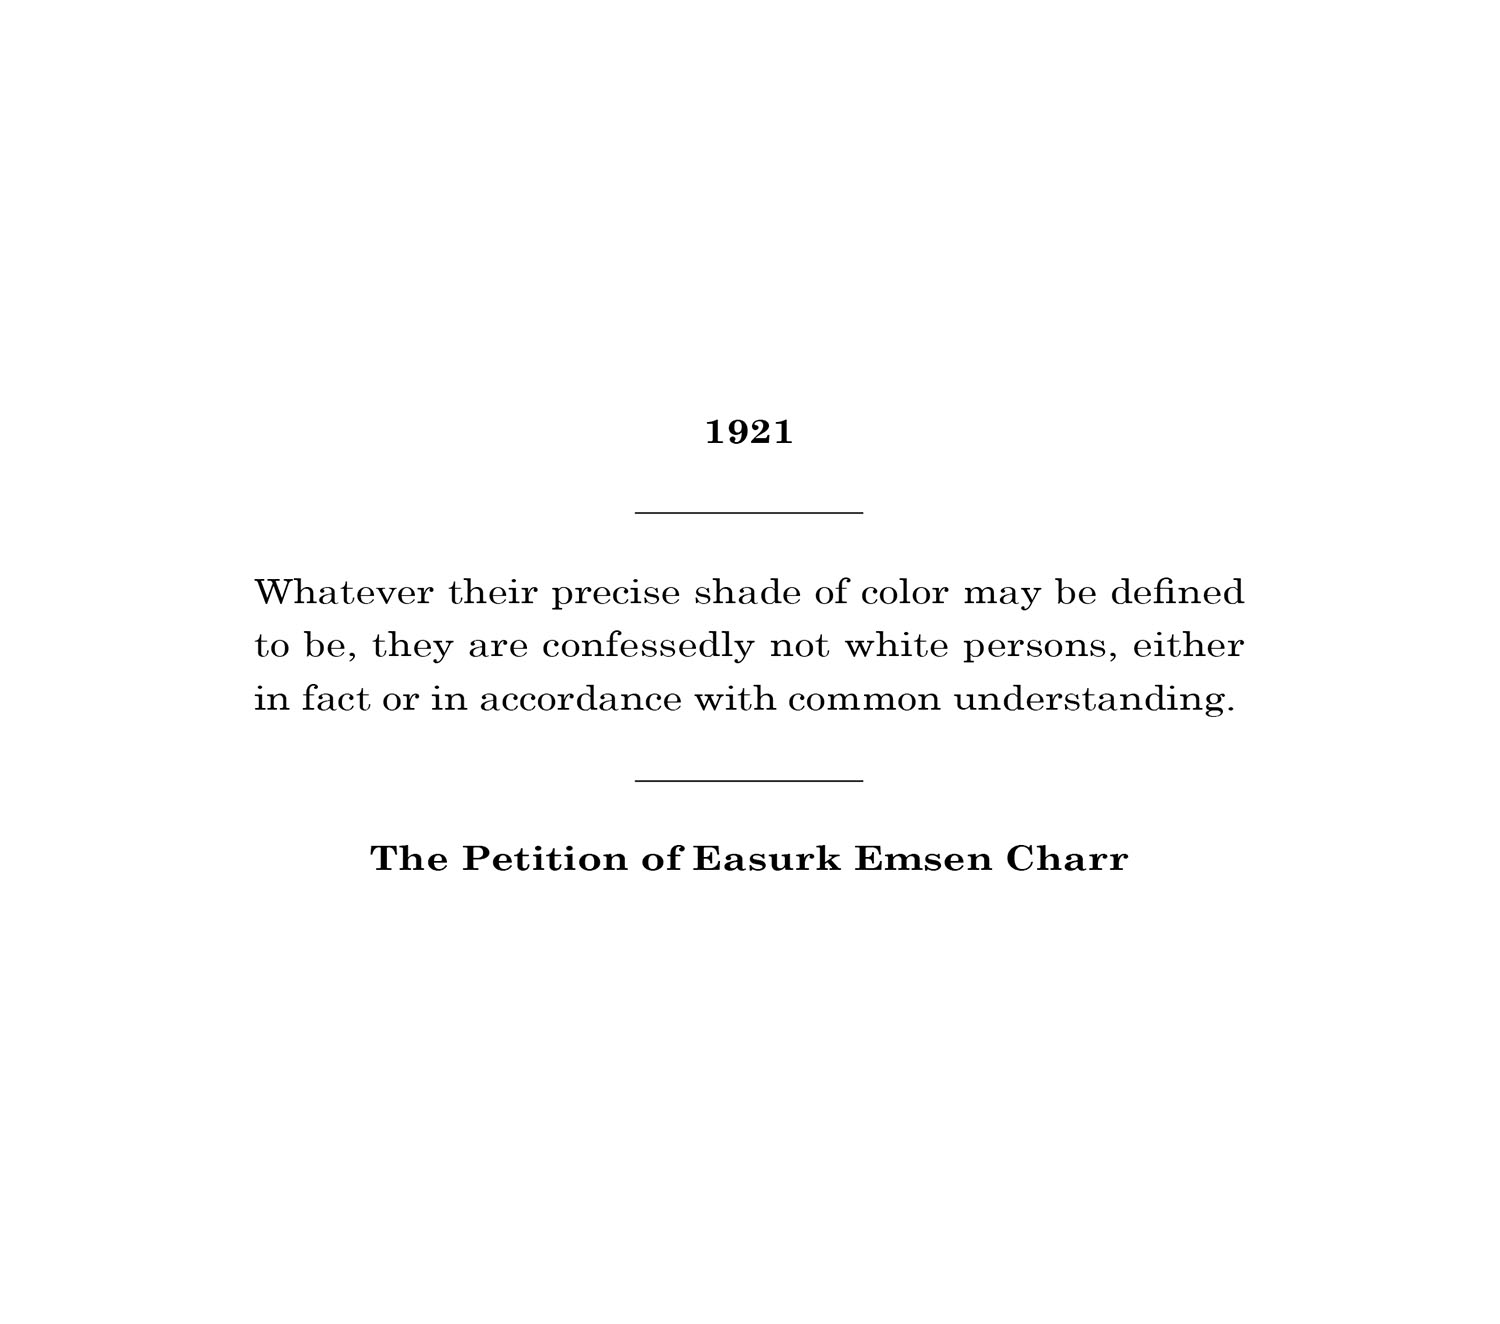 Whatever their precise shade of color may be defined to be, they are confessedly not white persons, either in fact or in accordance with common understanding. — The Petition of Easurk Emsen Charr (1921)